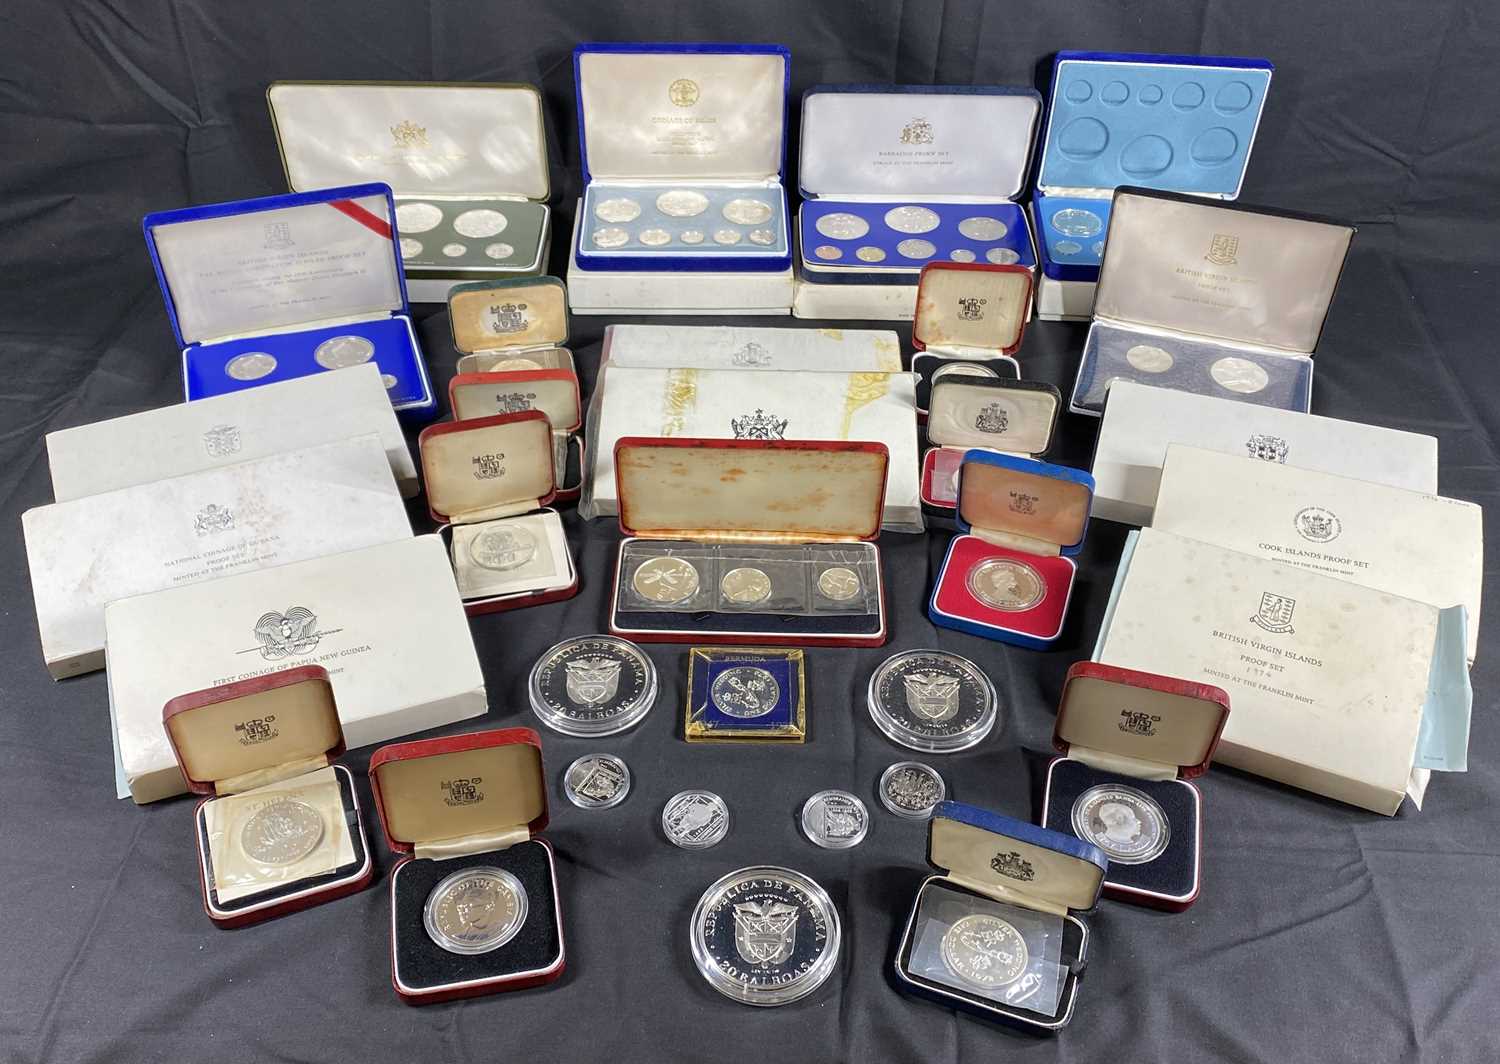 ROYAL MINT PROOF SILVER COINS, FRANKLIN MINT PROOF SILVER SETS, proof sets and other coins, the - Image 2 of 3